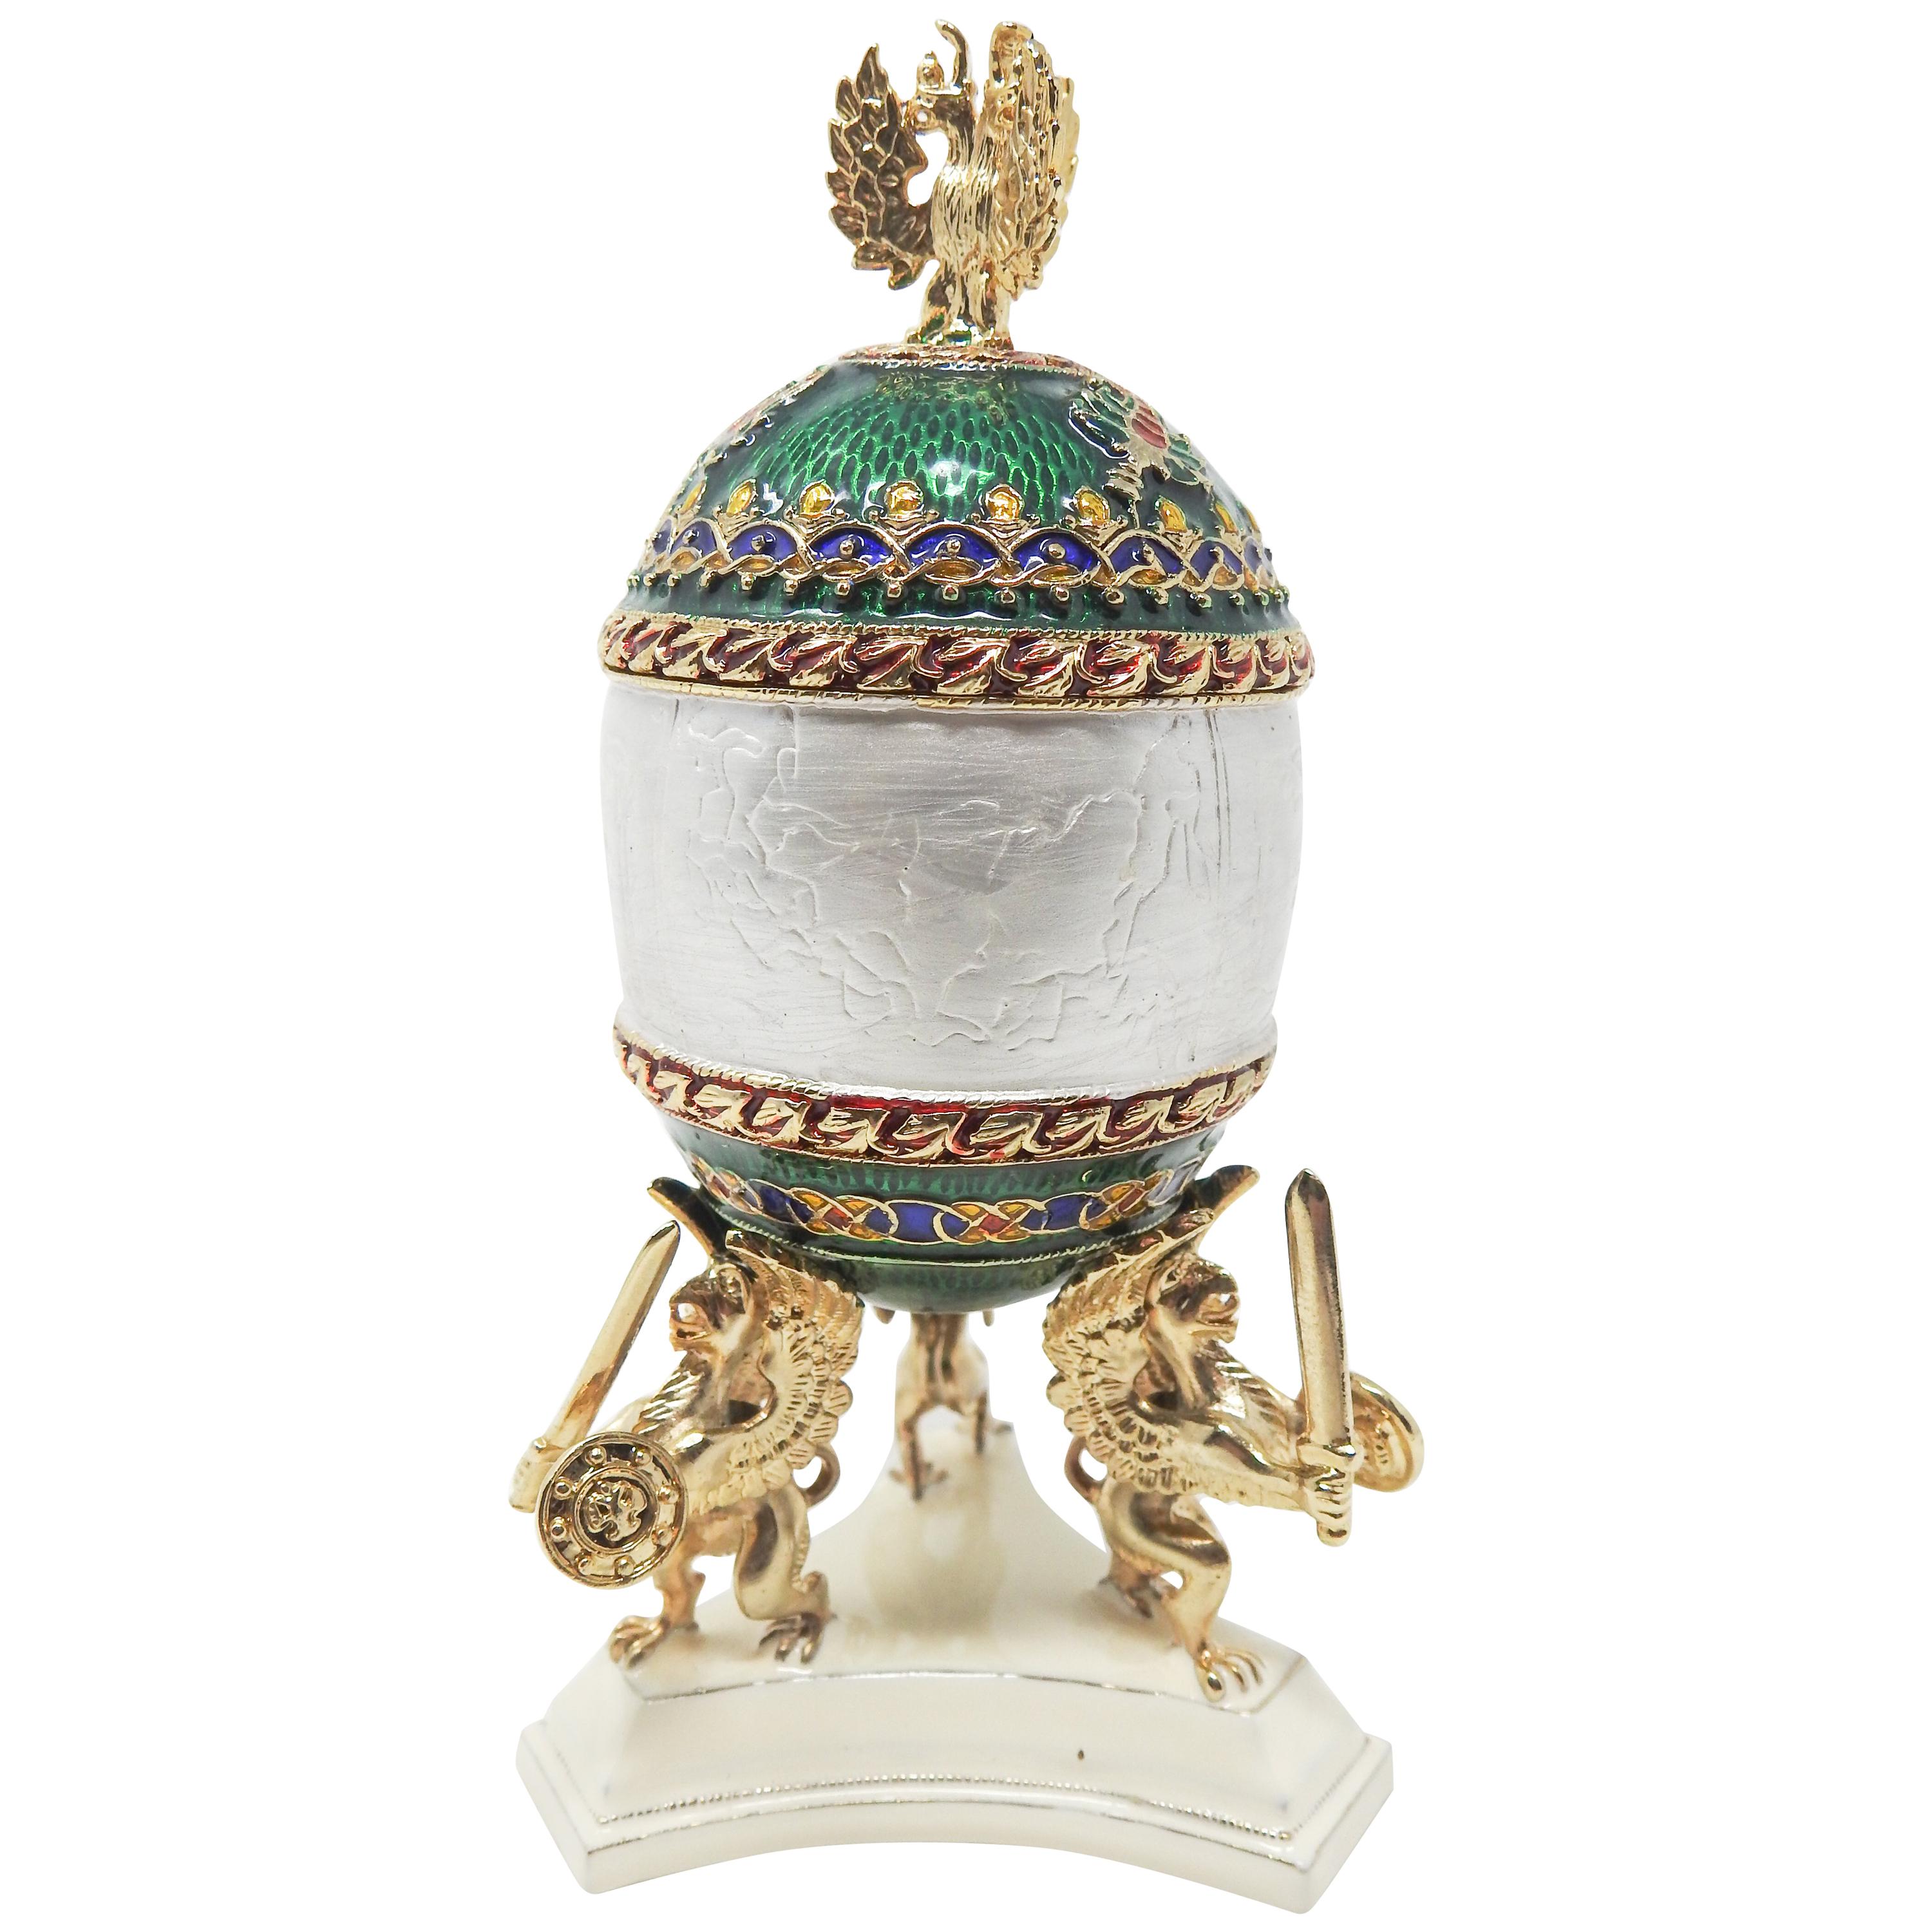 Faberge Style Egg For Sale